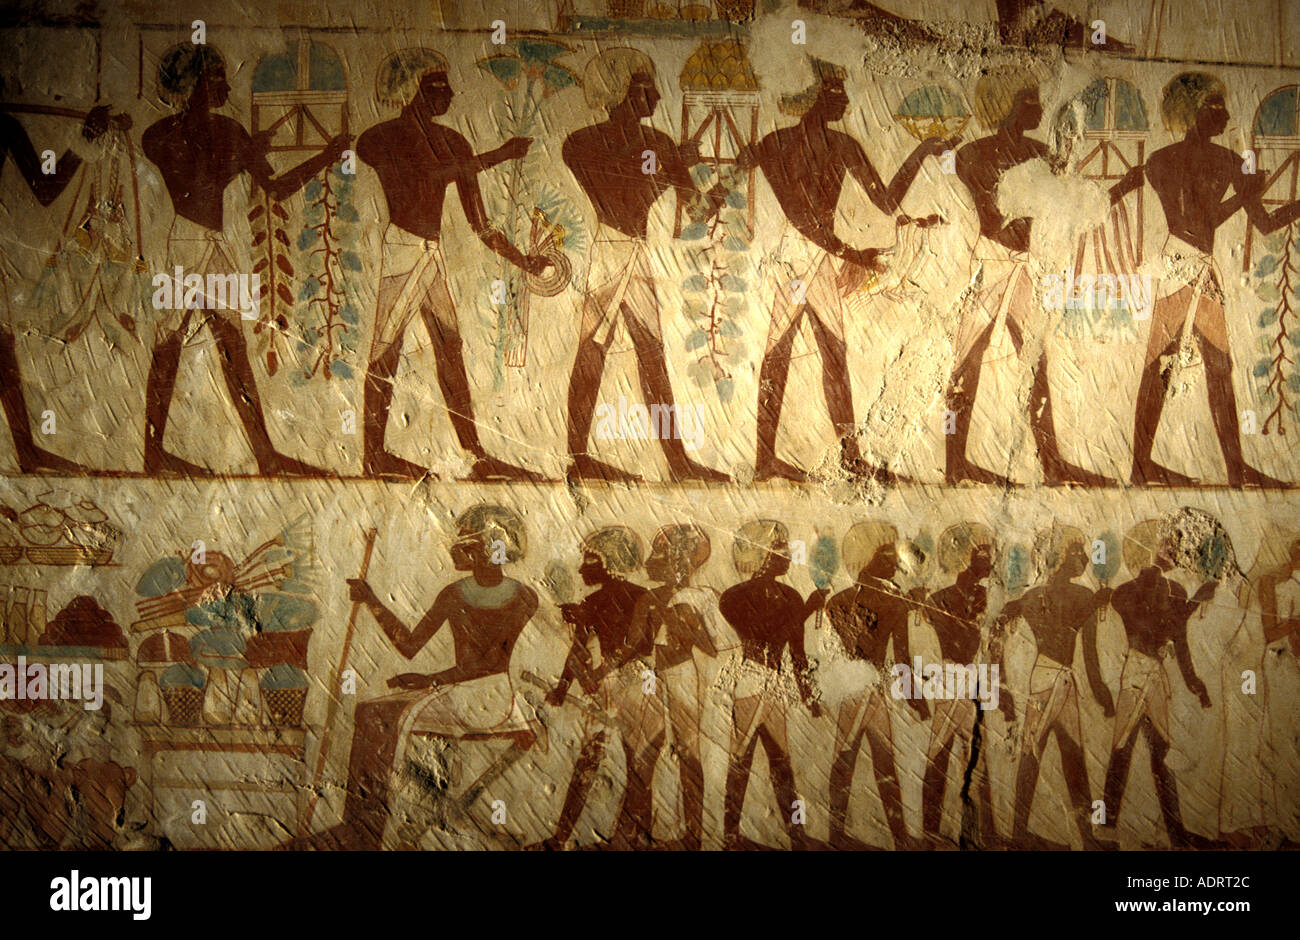 EGYPT mural in the tomb of Usherhet royal scribe to Amenophis II depicts a farming scene in ancient Egypt Stock Photo